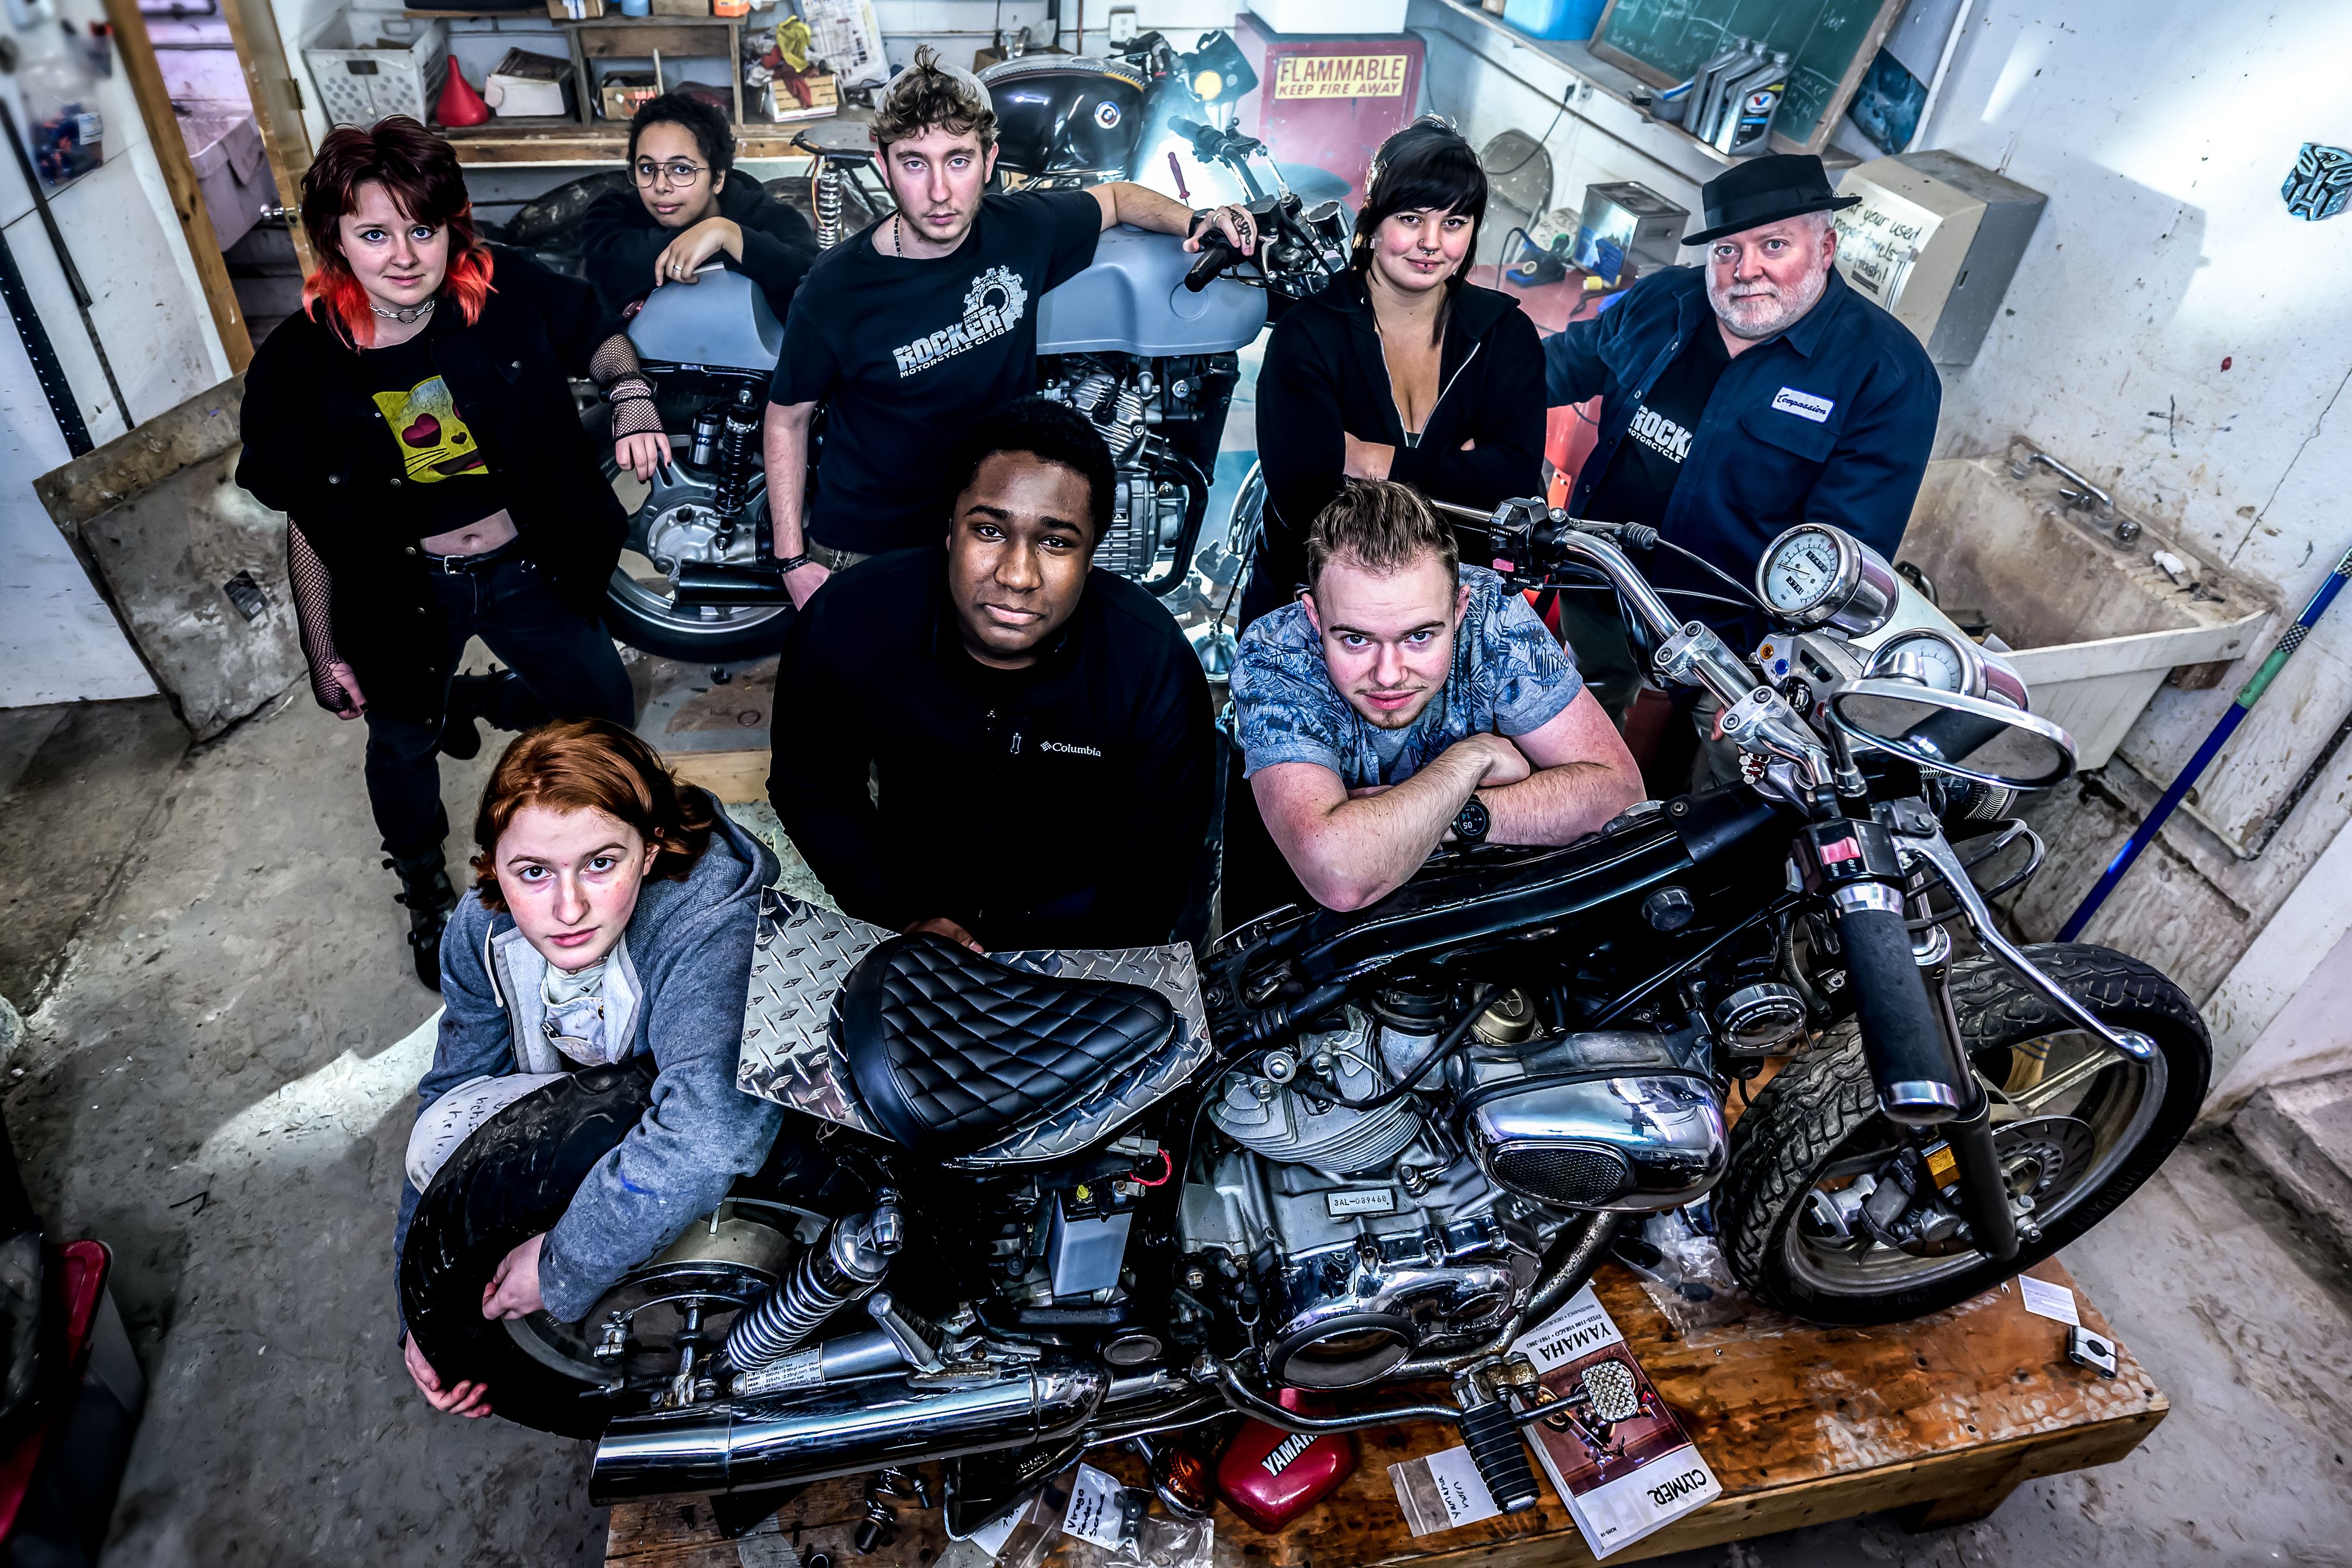 Group of students with motorcycle in shop